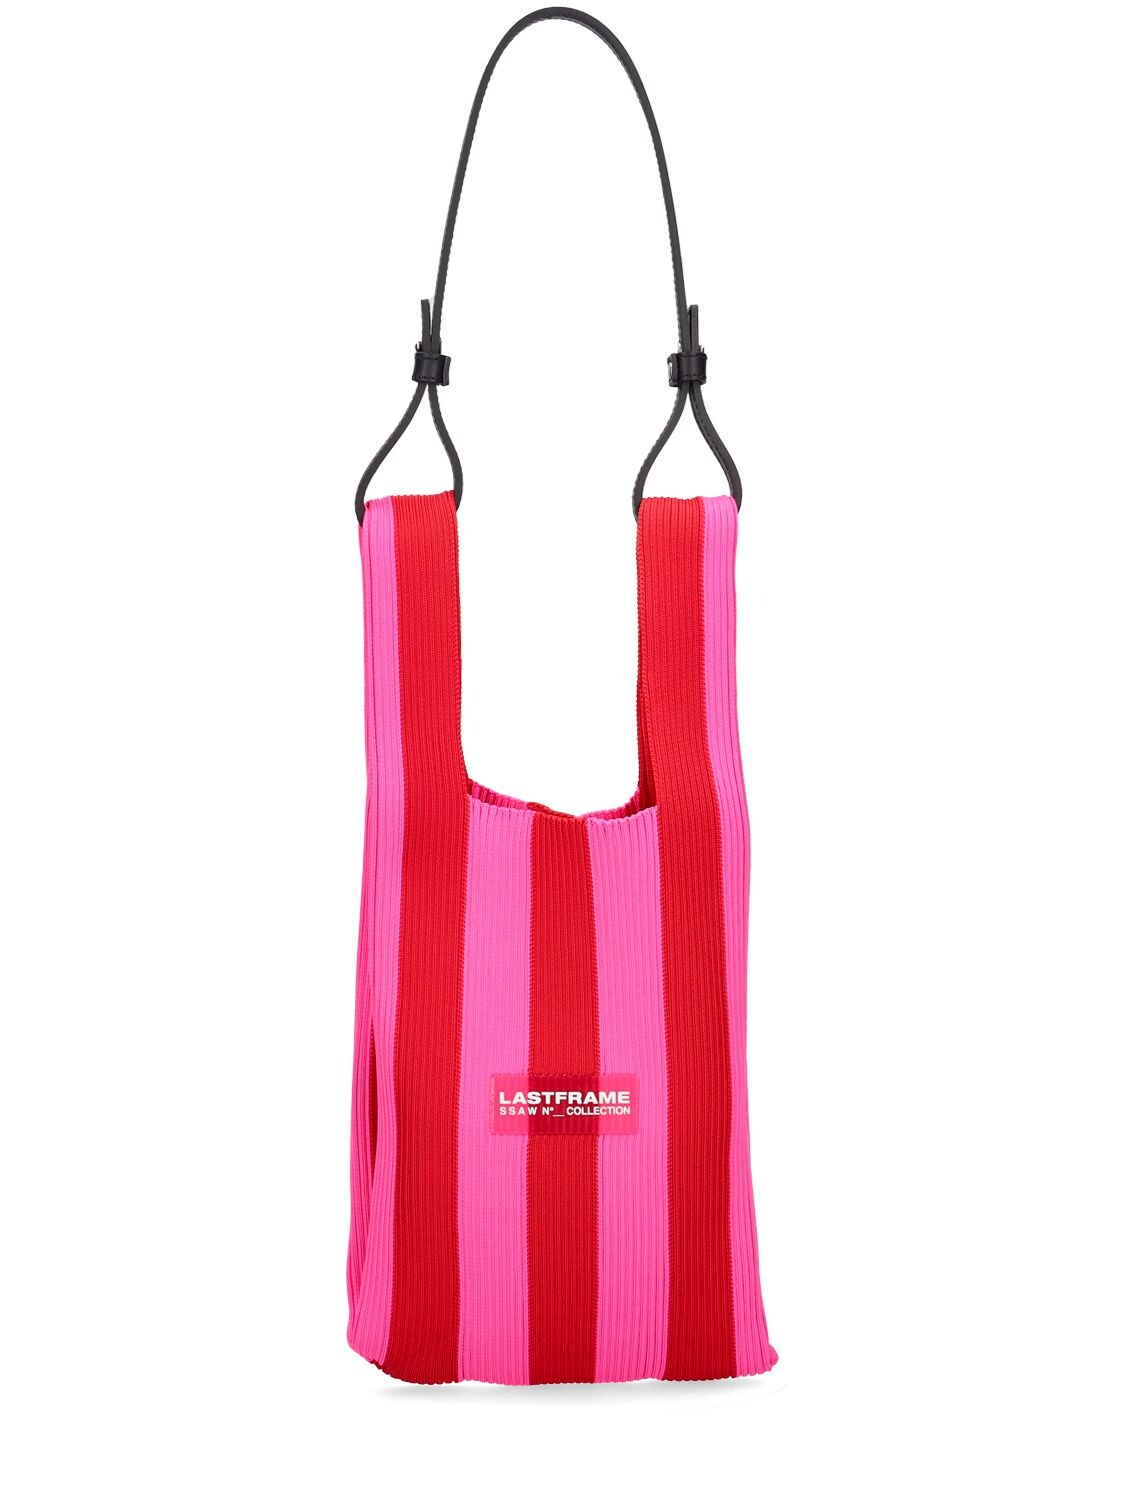 Lastframe Small Stripe Market Bag W/ Leather Strap In Neon Pink